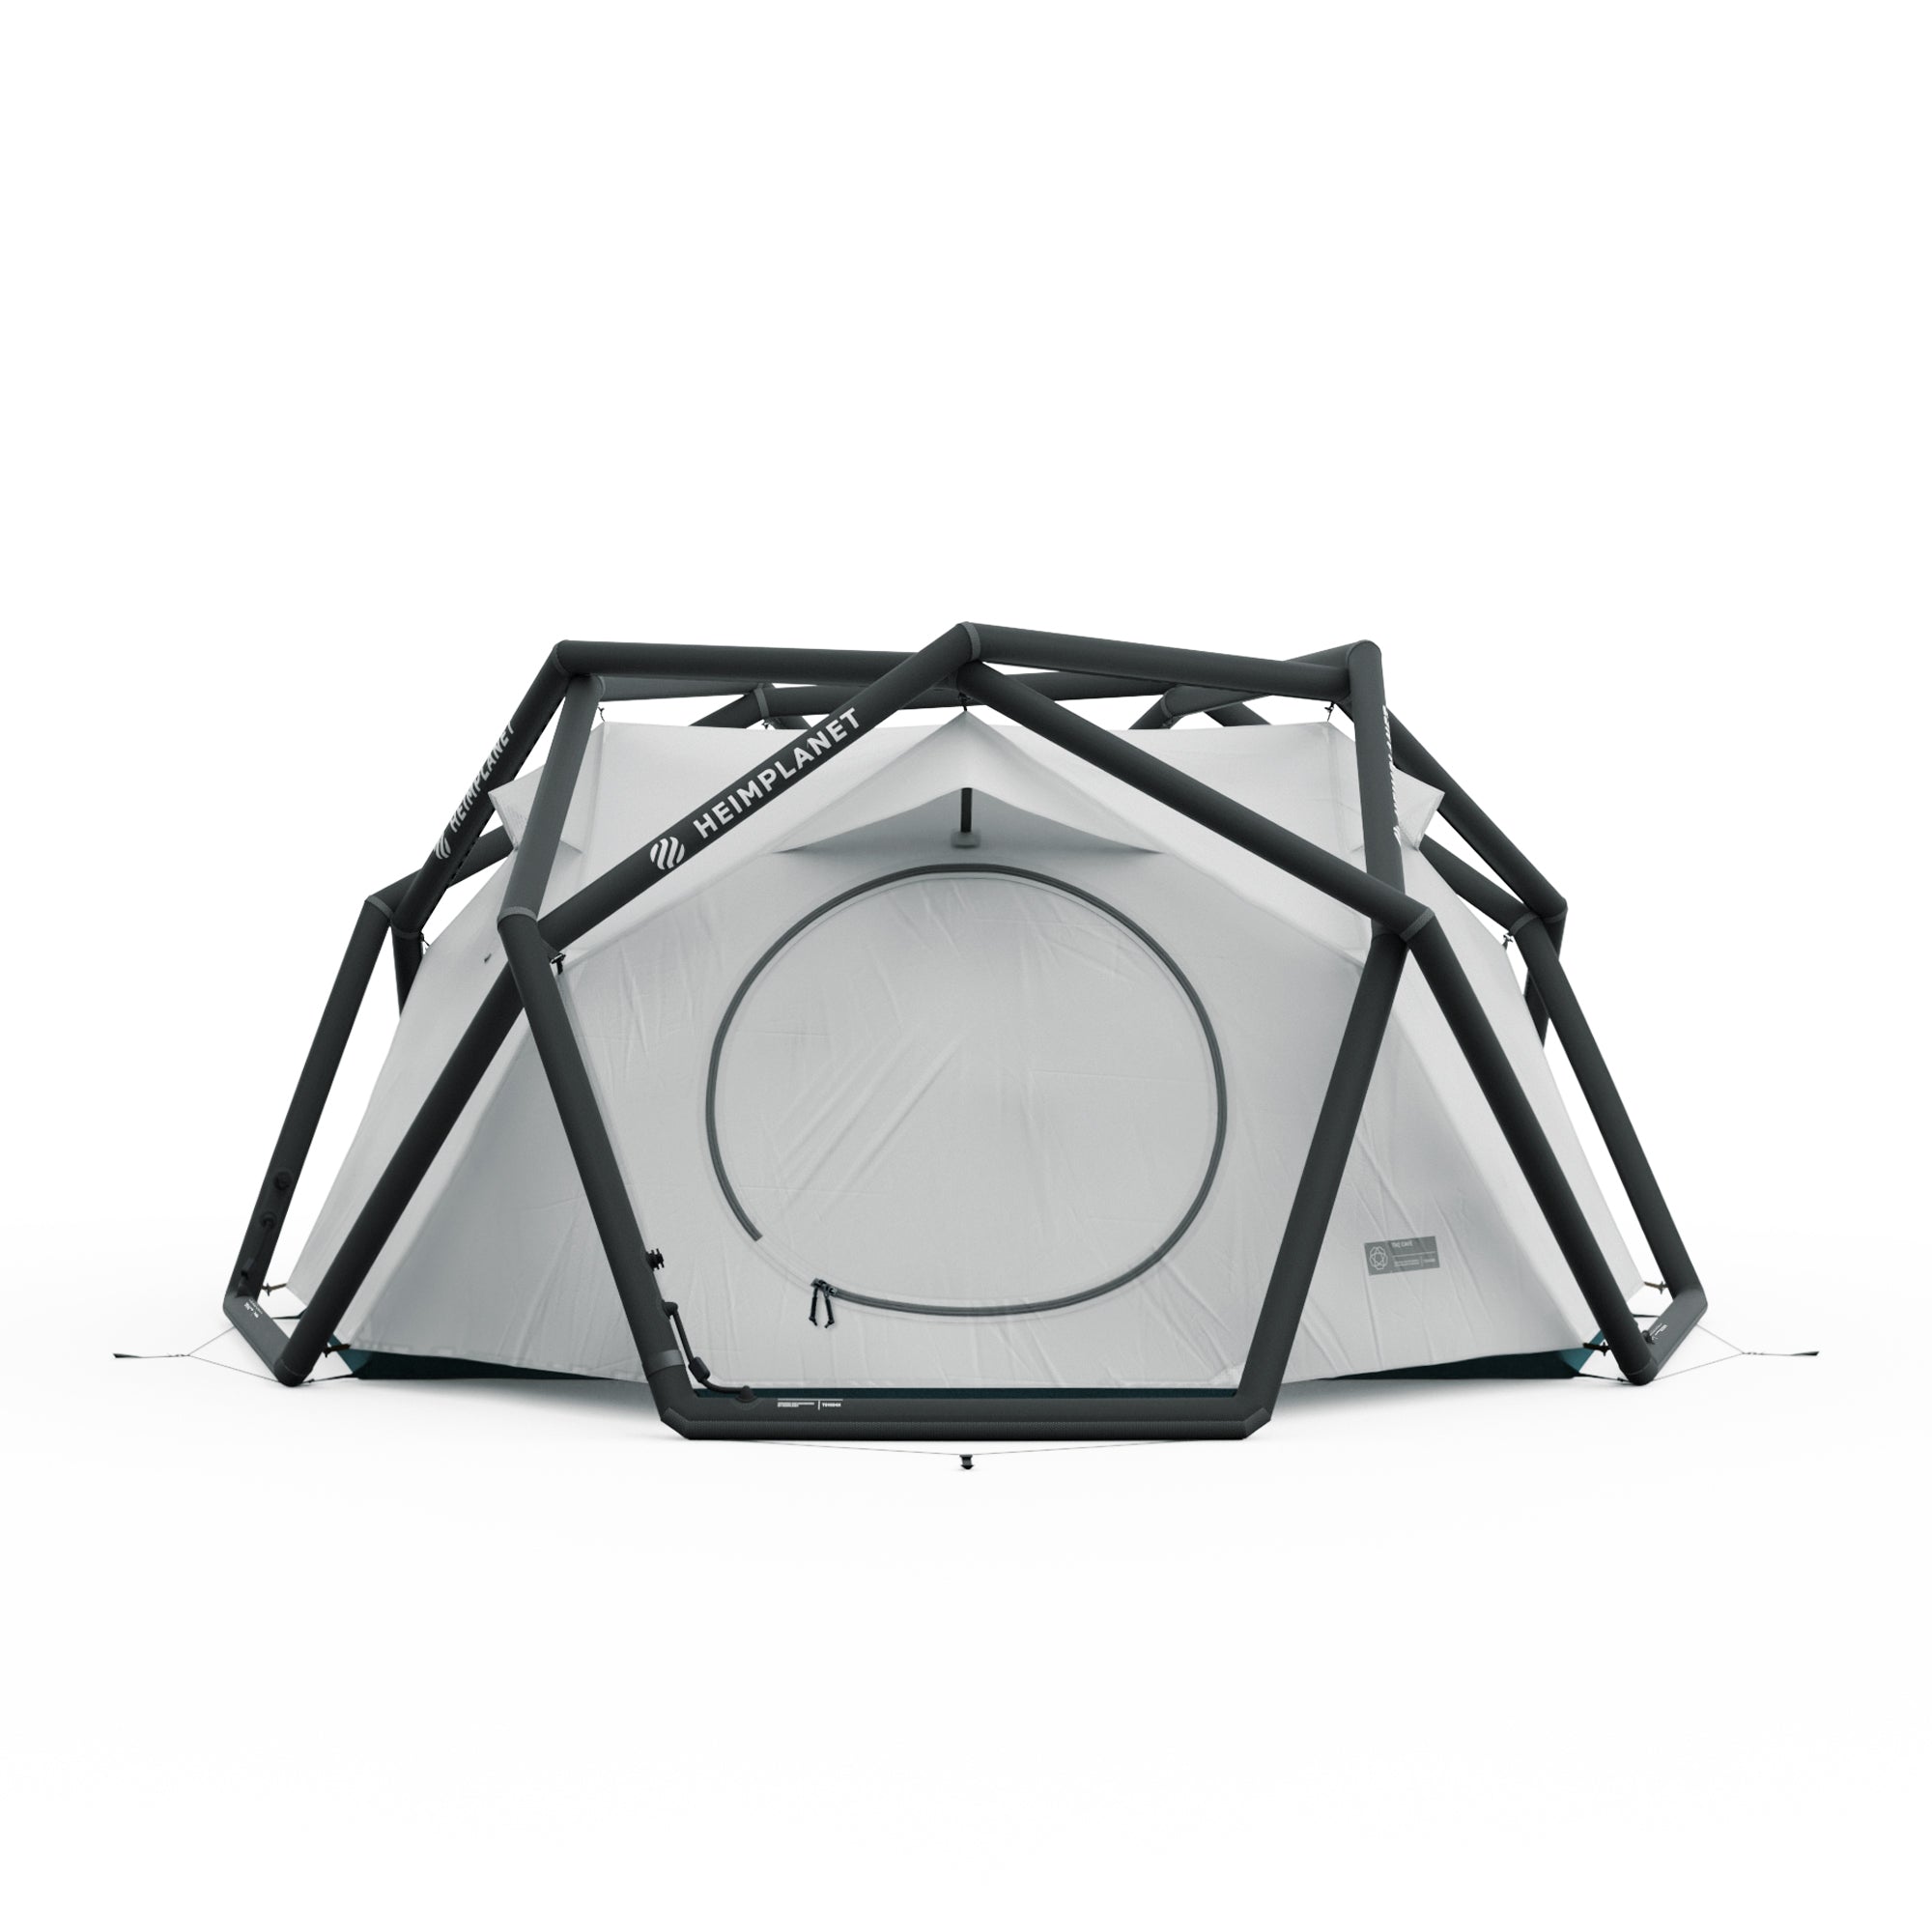 HEIMPLANET THE CAVE XL  x 66° North　激レア